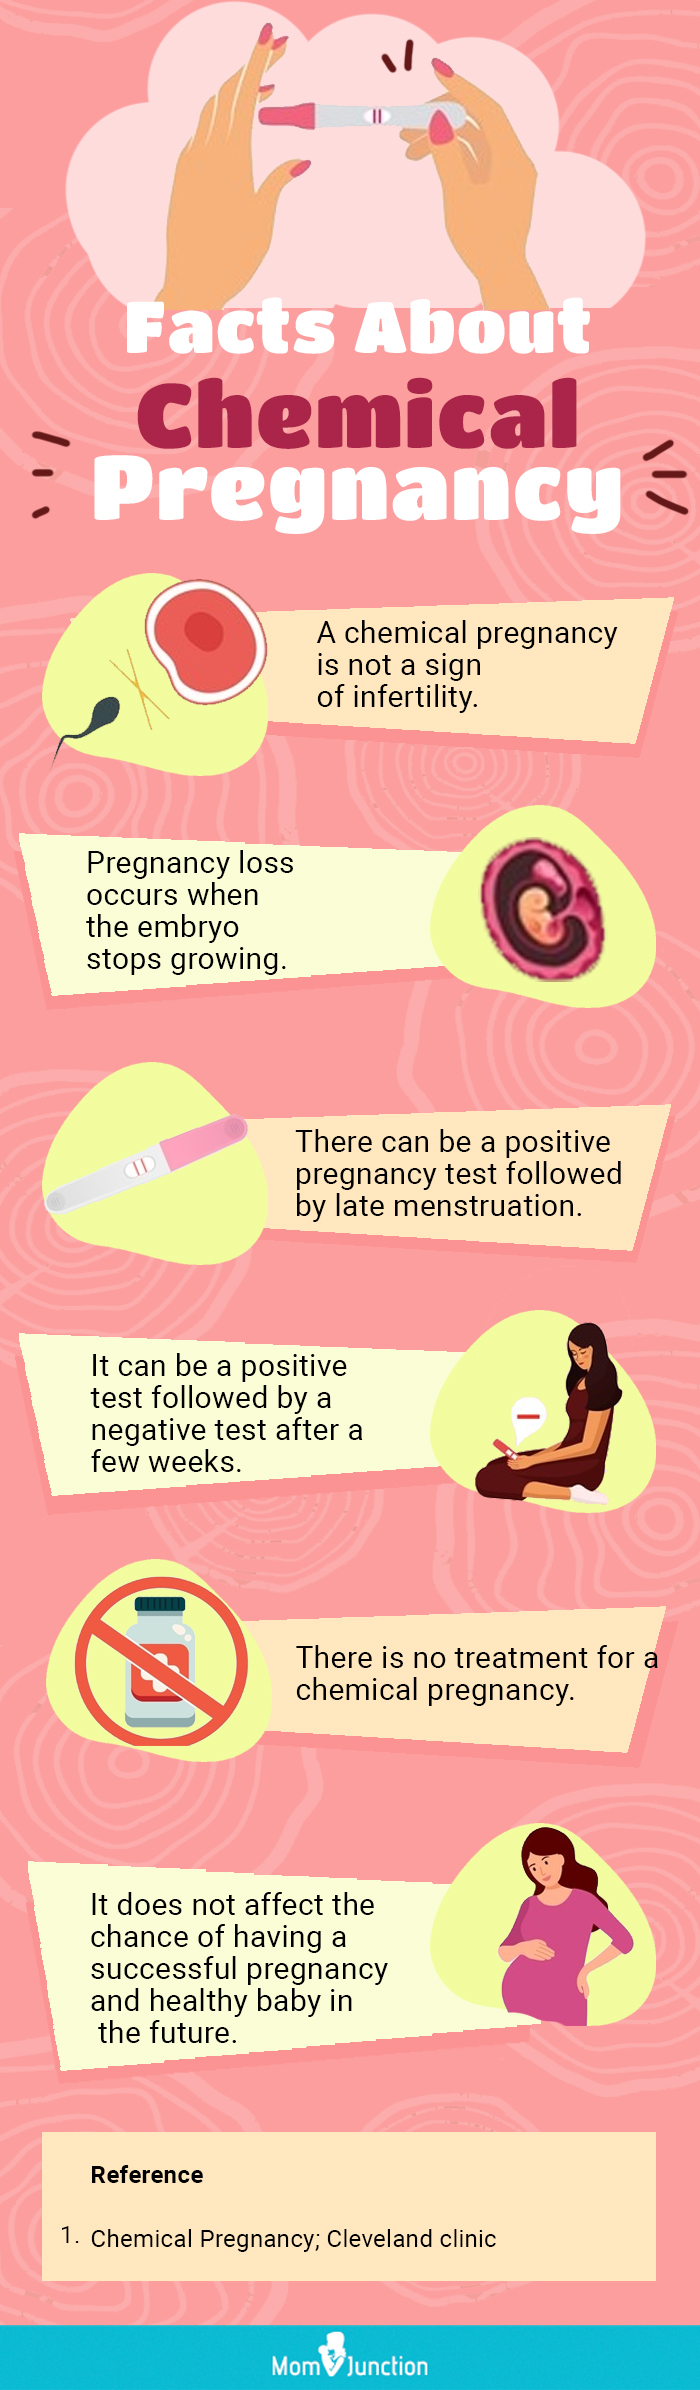 facts about a chemical pregnancy (infographic)